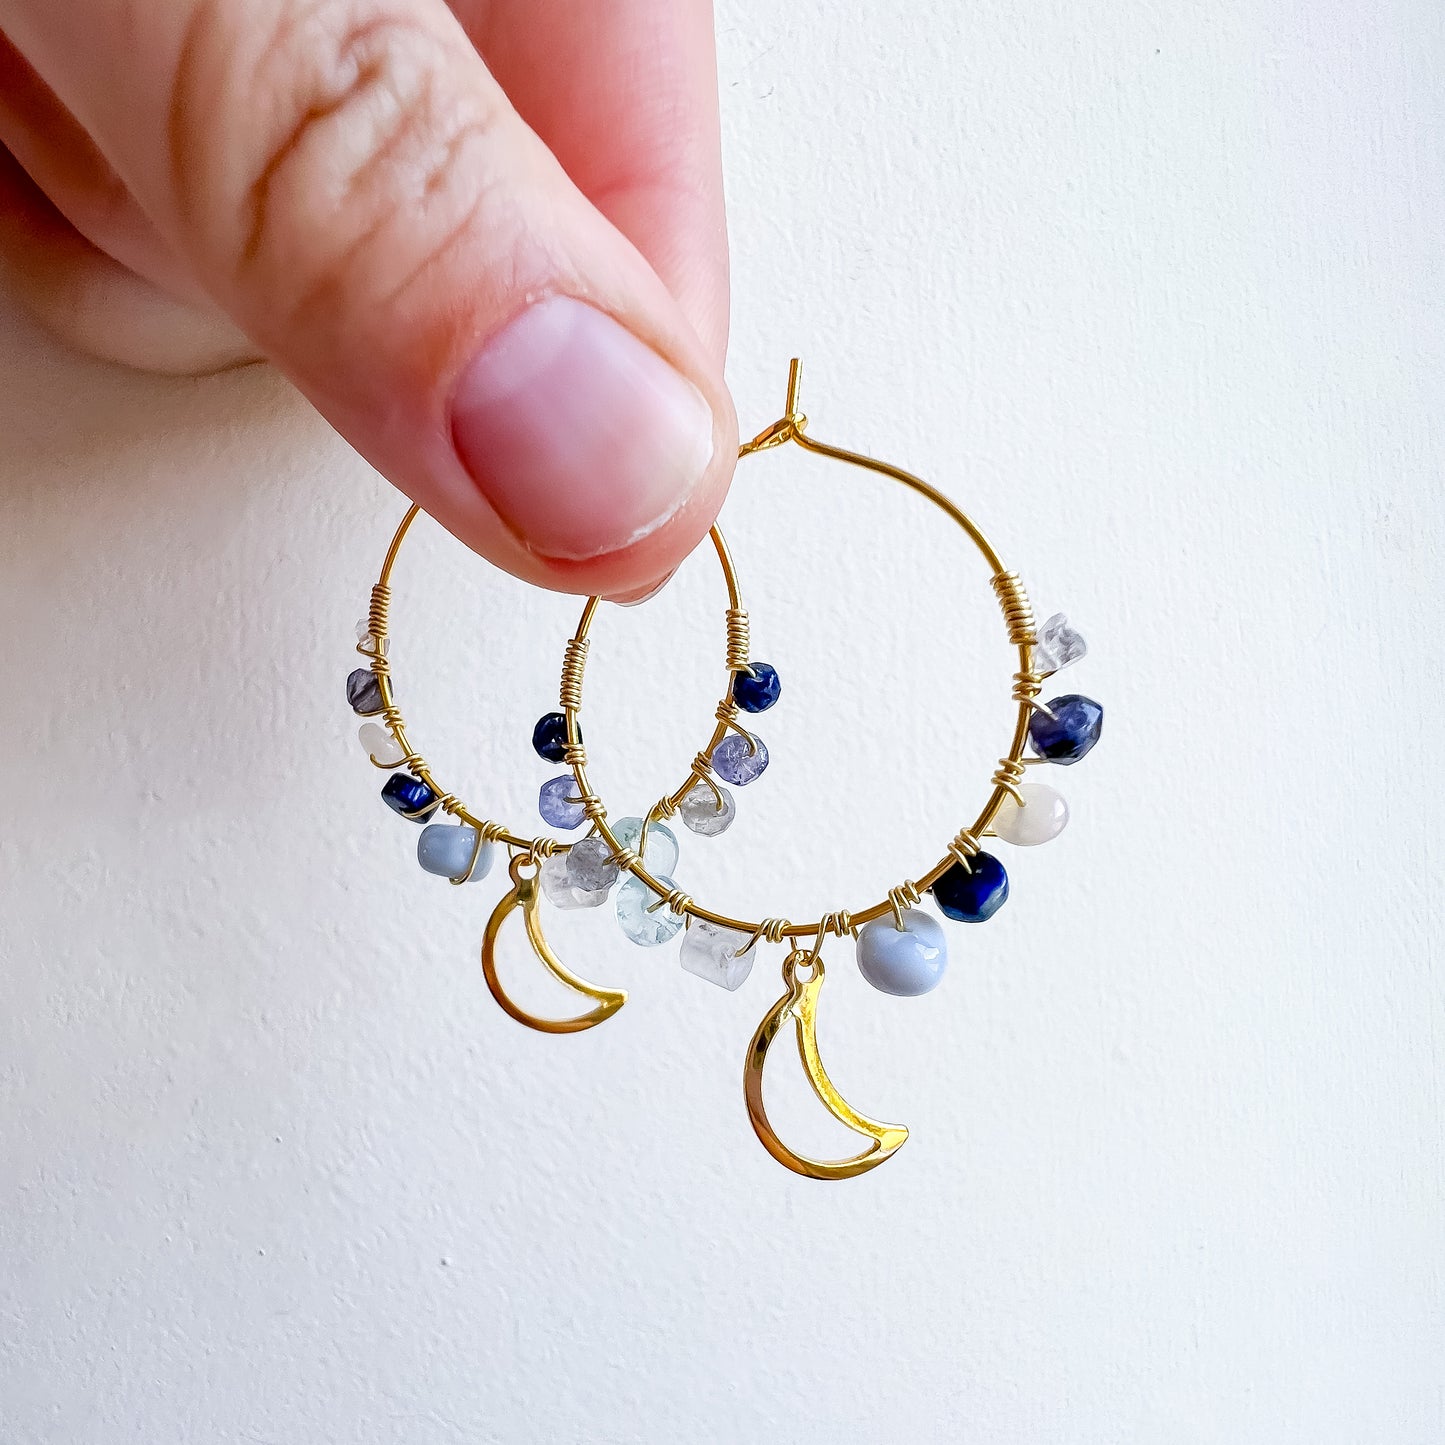 . PRE- ORDERS - Gold colour - “Once in a blue moon” earrings